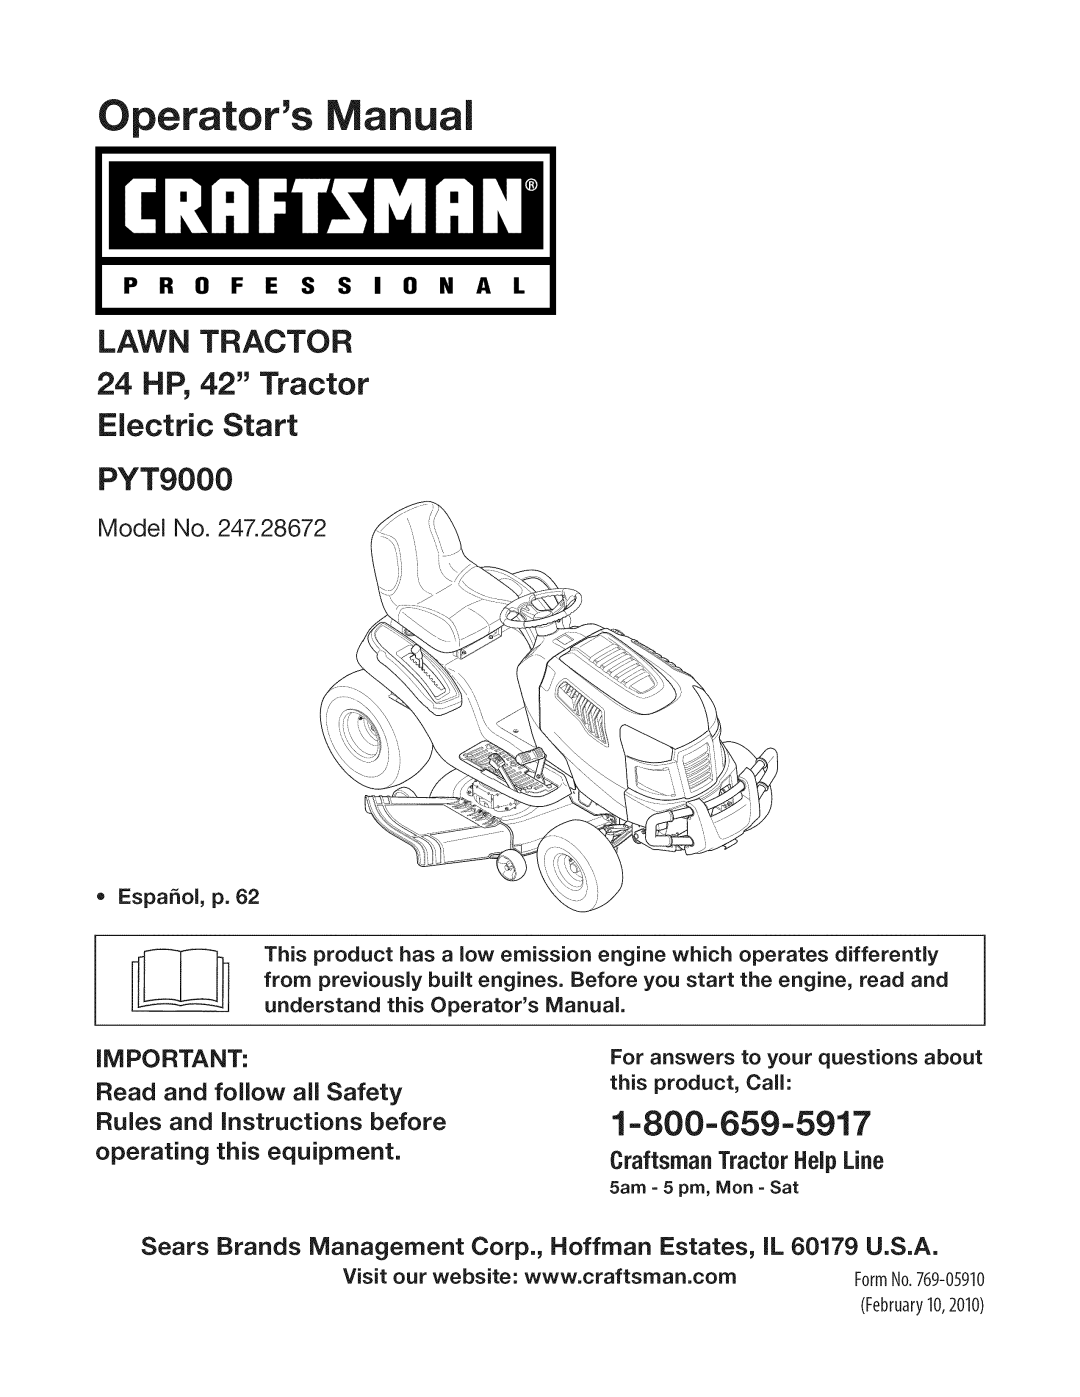 Craftsman 247.28672 manual perator s, 1=800=659=5917, Lawn Tractor, 24 HP, 42 Tractor, Electric Start PYT9000, Model No 